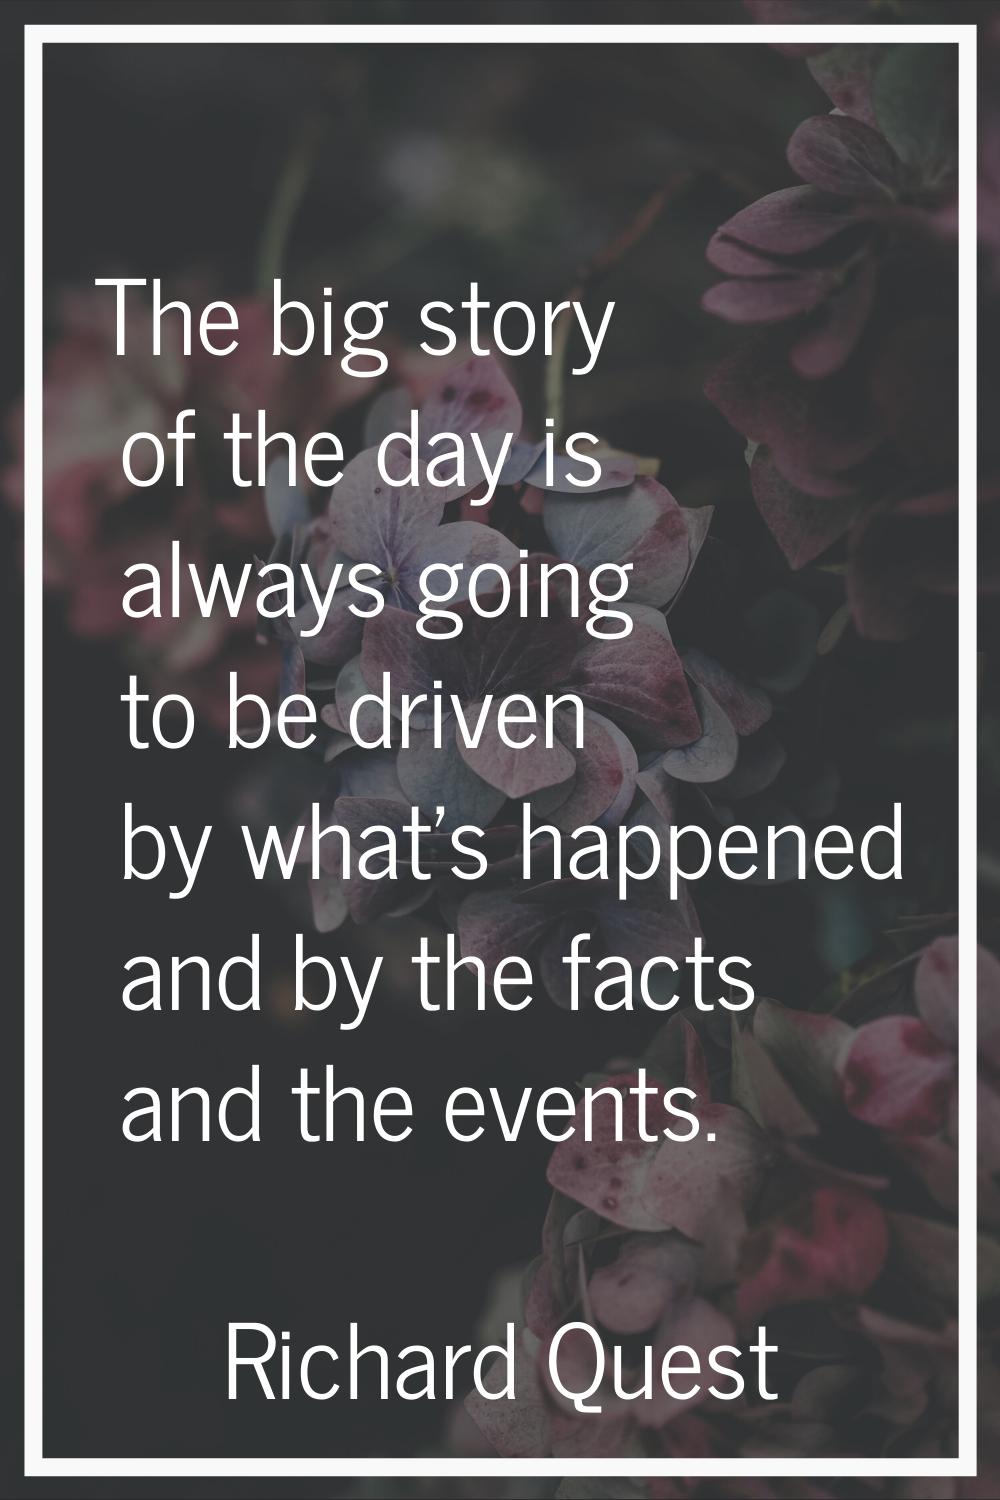 The big story of the day is always going to be driven by what's happened and by the facts and the e